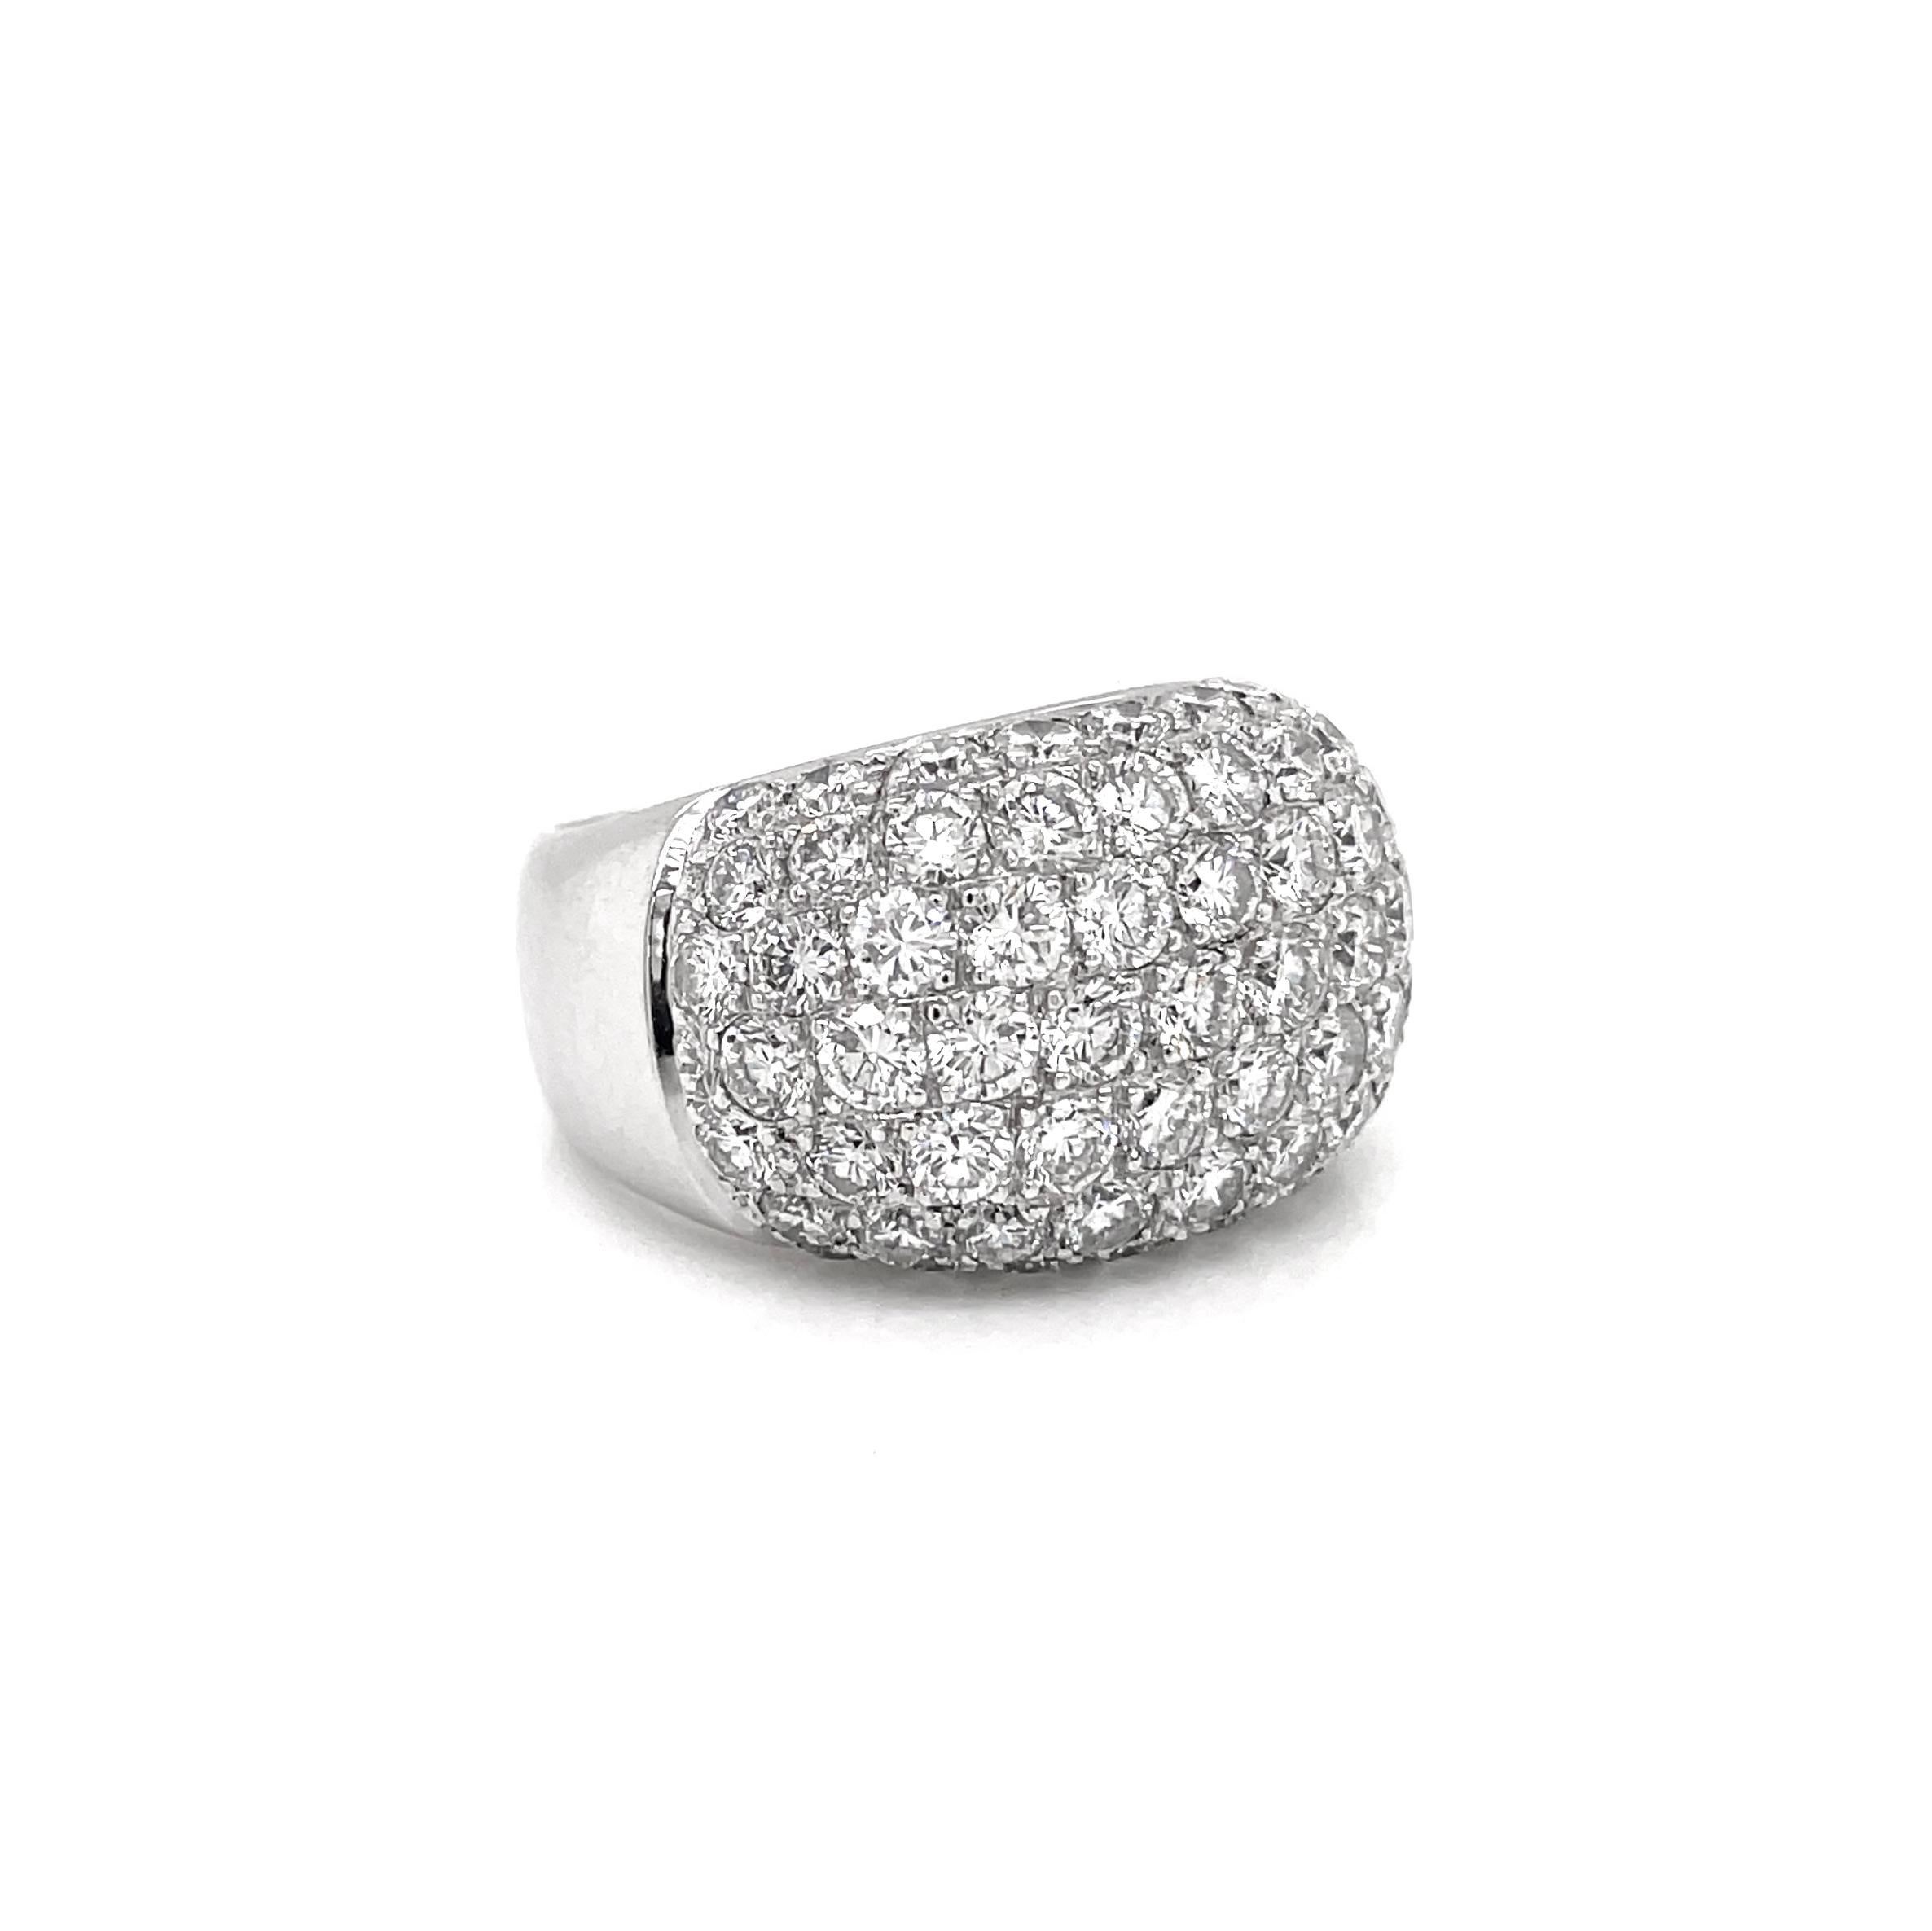 This stunning bombé cluster ring is set with 63 fine quality round brilliant cut diamonds coming to an approximate total weight of 4.50ct, all pavé set in an 18 carat white gold open back mount. The ring tapers from 6.5mm at the back to 14.3mm in